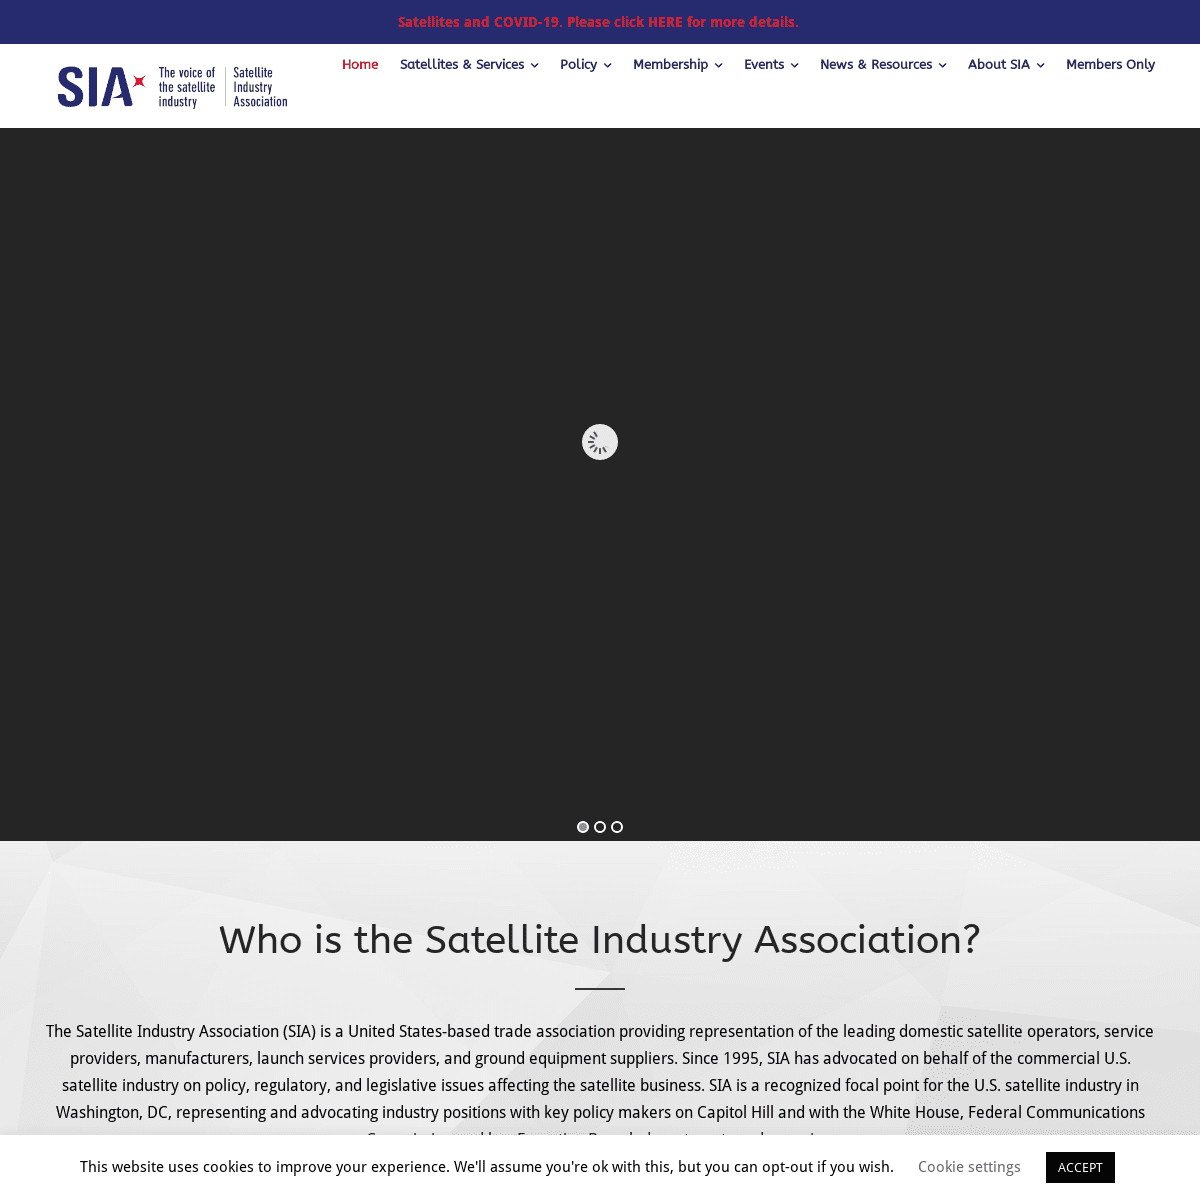 A complete backup of https://sia.org